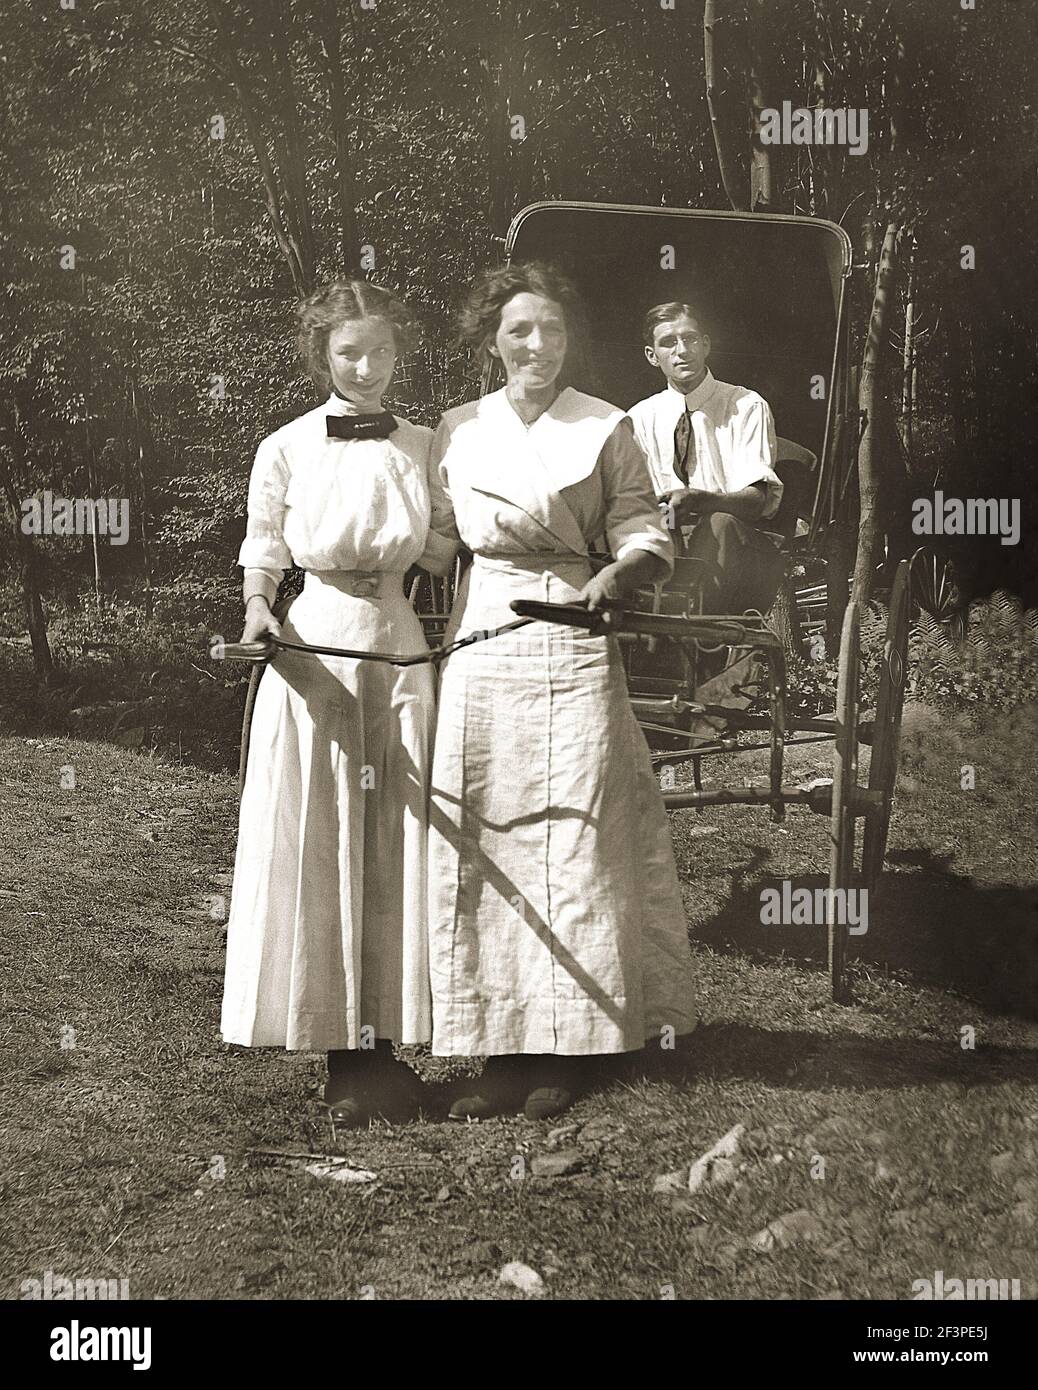 Two unidentified women pull a horse buggy with a man in it. from the early 1900's, Located at Bear Creek, Pennsylvania, USA. Stock Photo